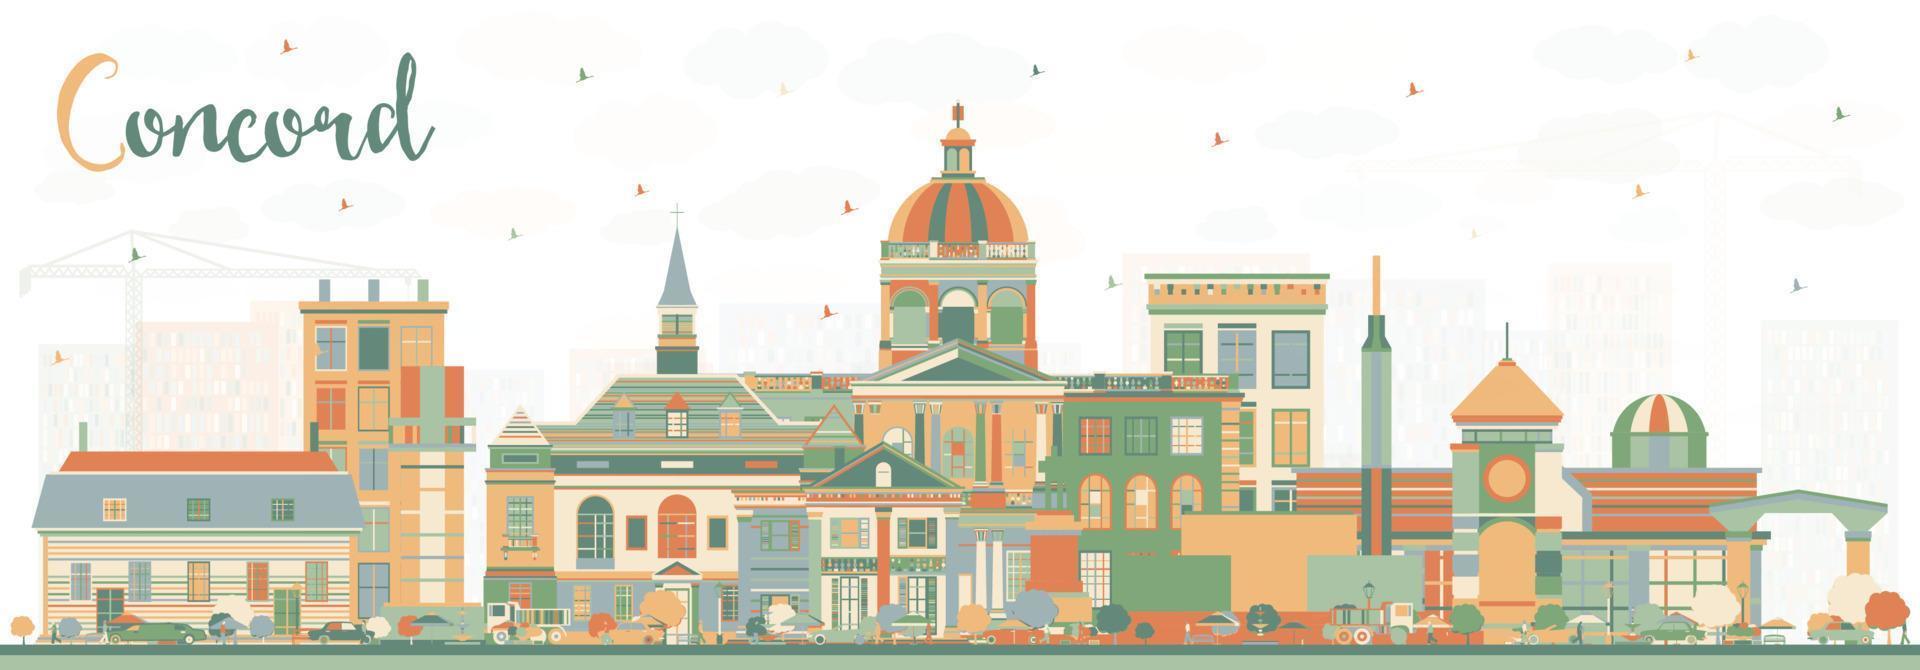 Concord New Hampshire City Skyline with Color Buildings. vector